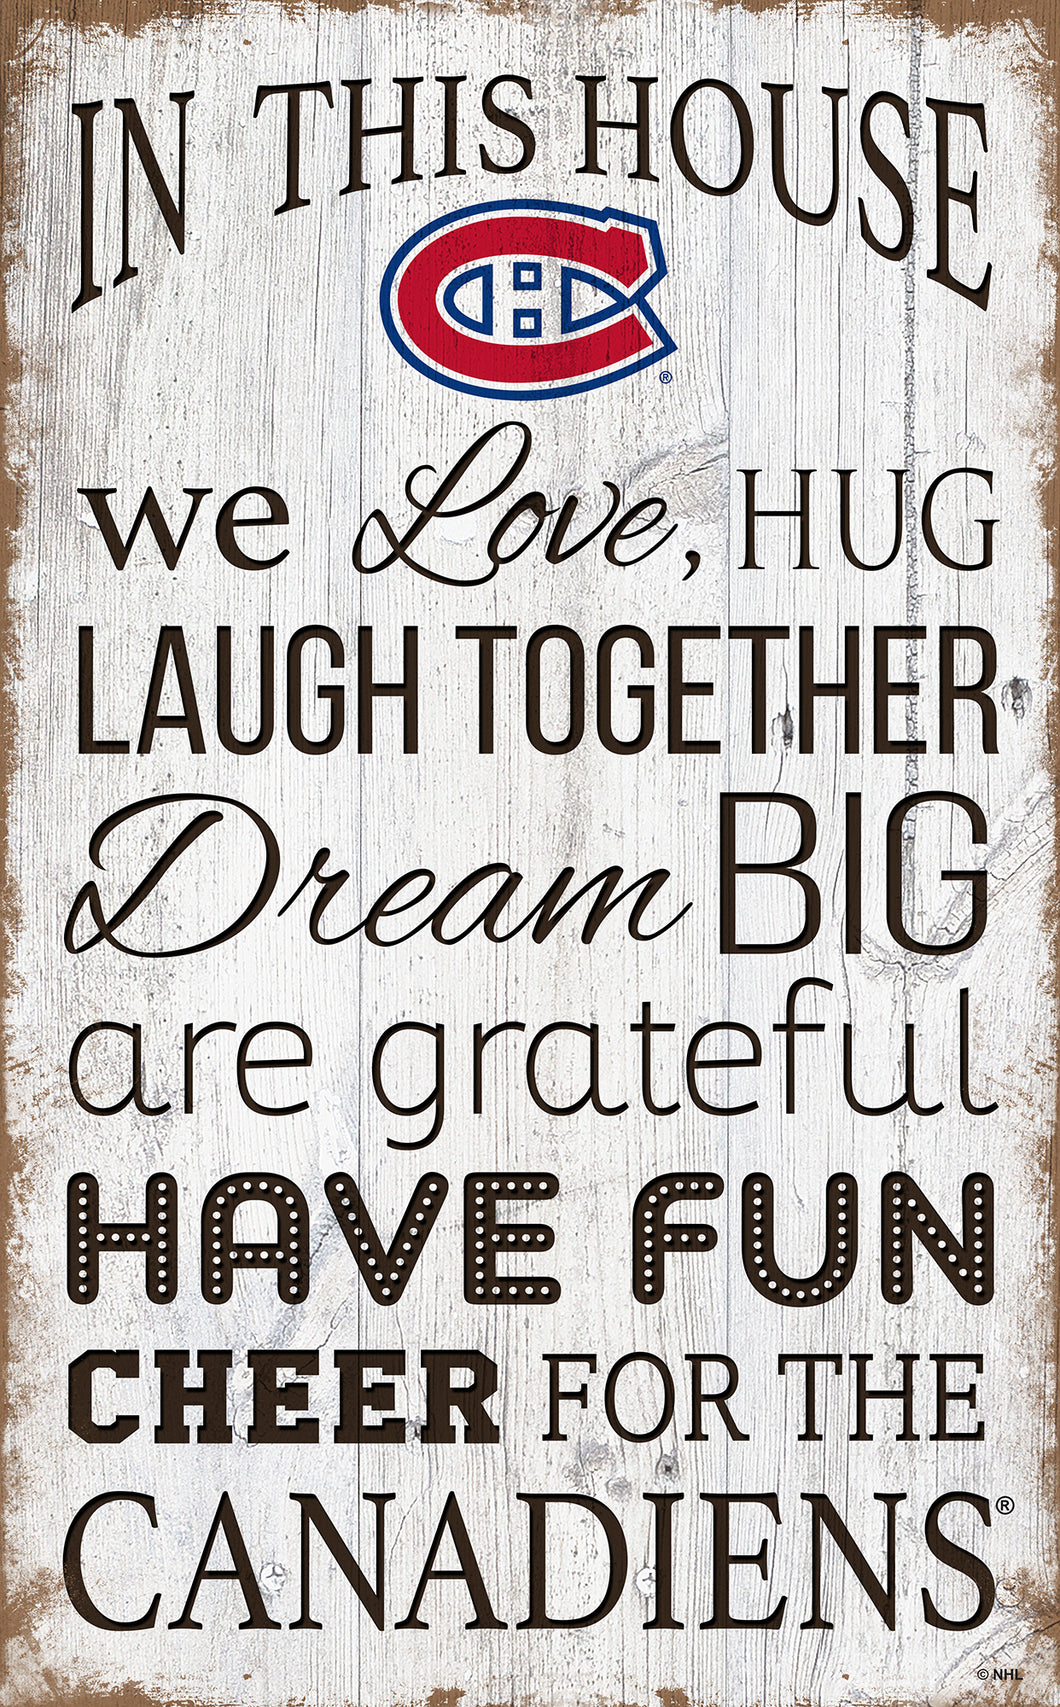 Montreal Canadiens House Rules Sign - 11